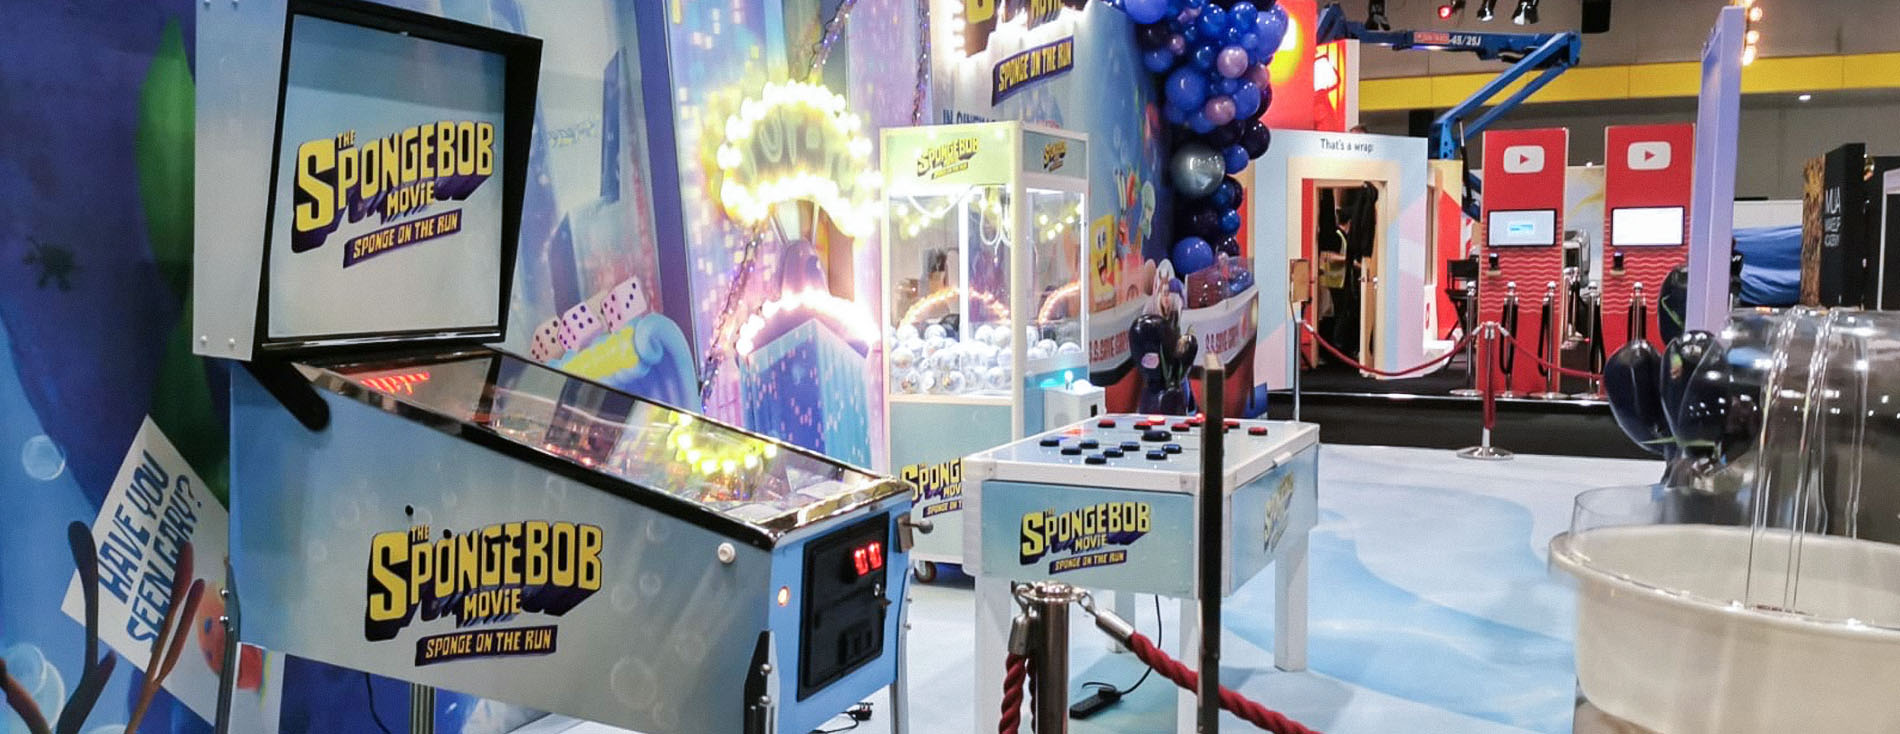 A selection of arcade games branded for the release of The Spongebob Movie